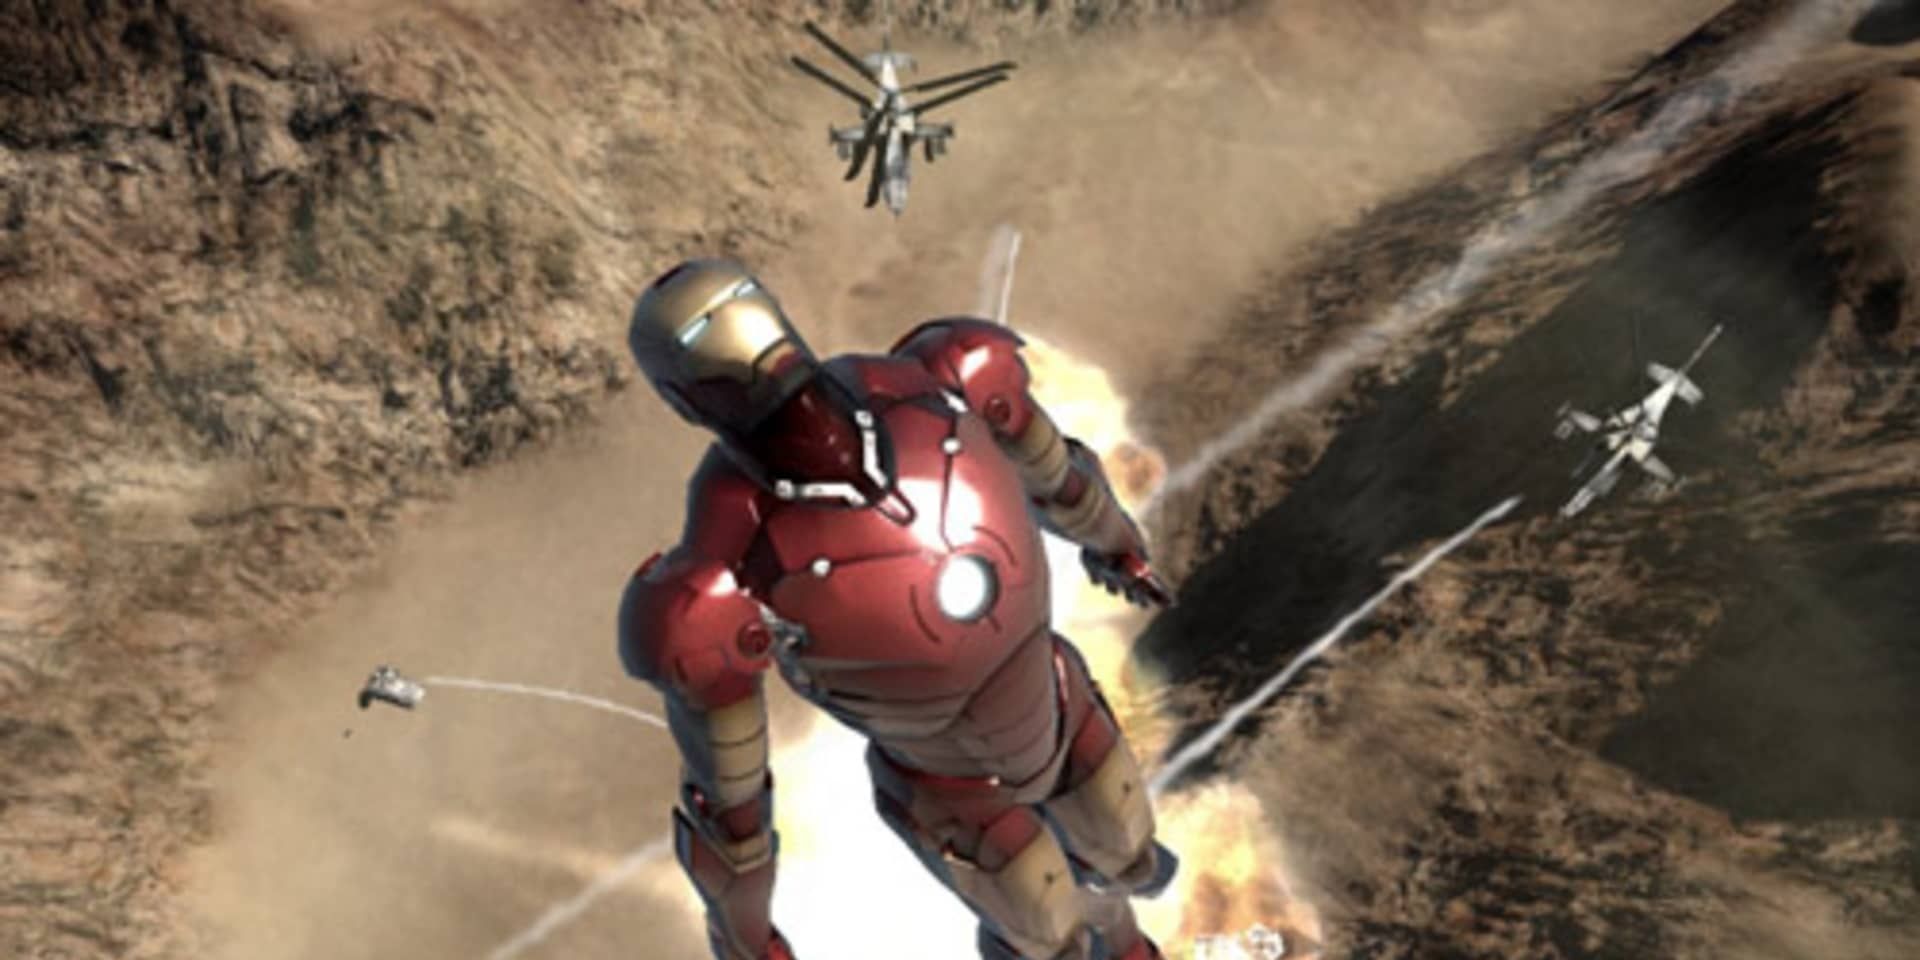 Iron Man flies away from enemy helicopters in a desert area 